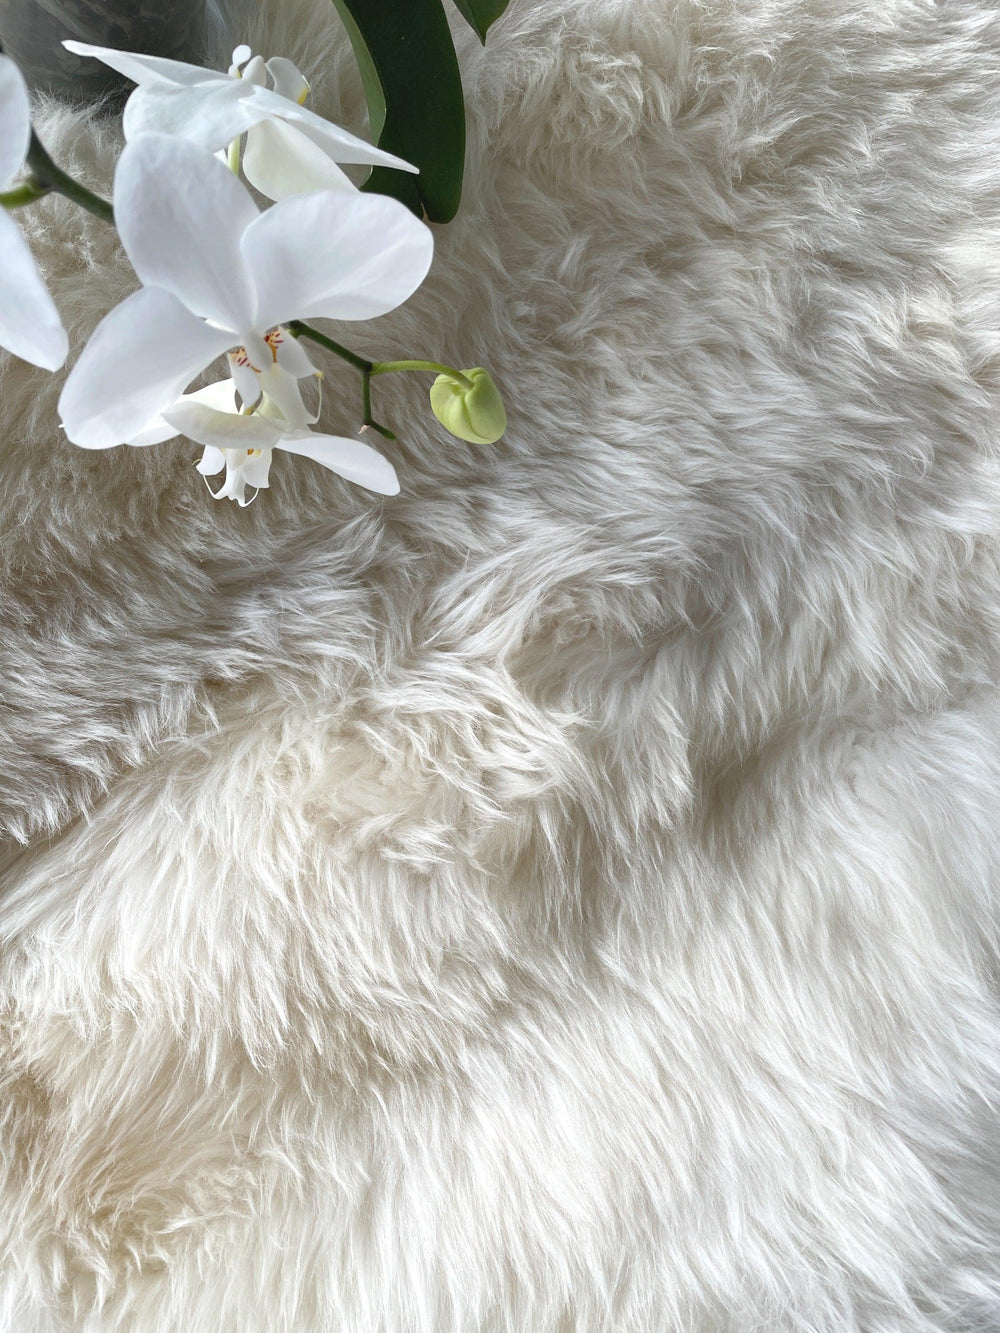 5 REASONS WHY SHEEPSKIN IS GOOD FOR YOUR HEALTH (AND YOUR BABY)